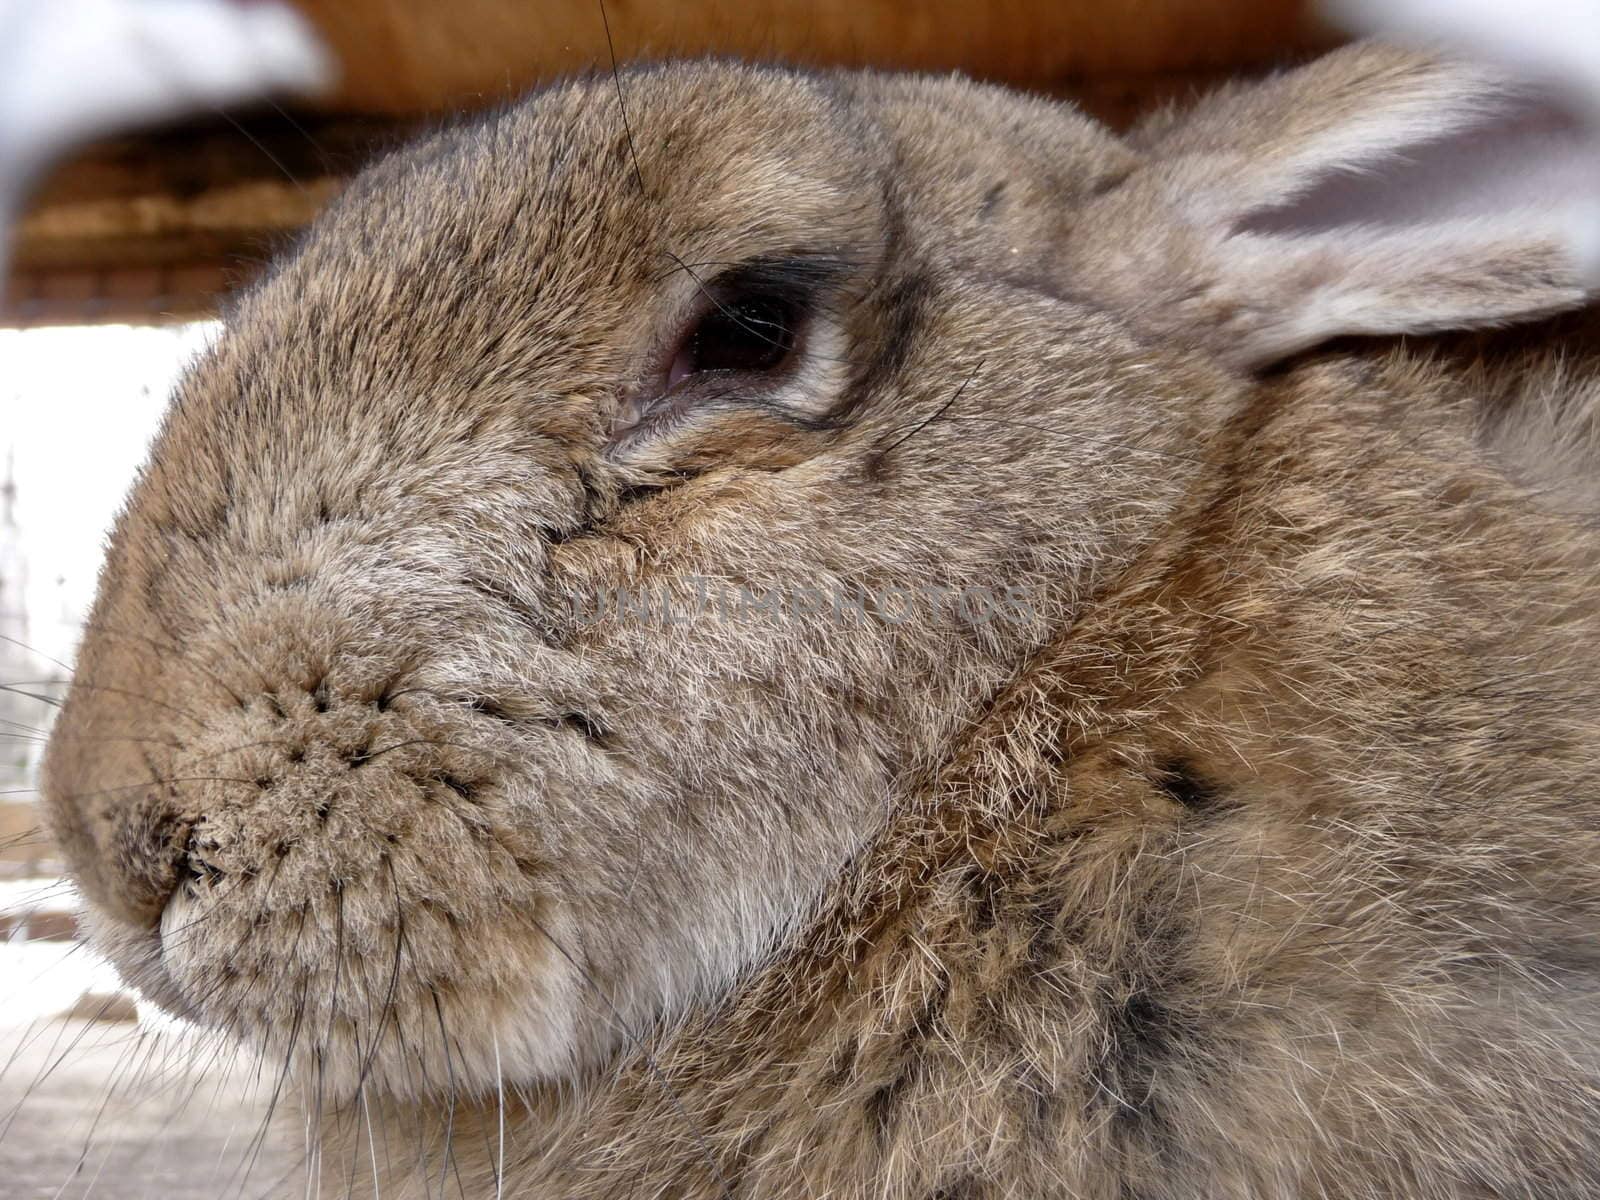 Head of the large fuzzy gray hare